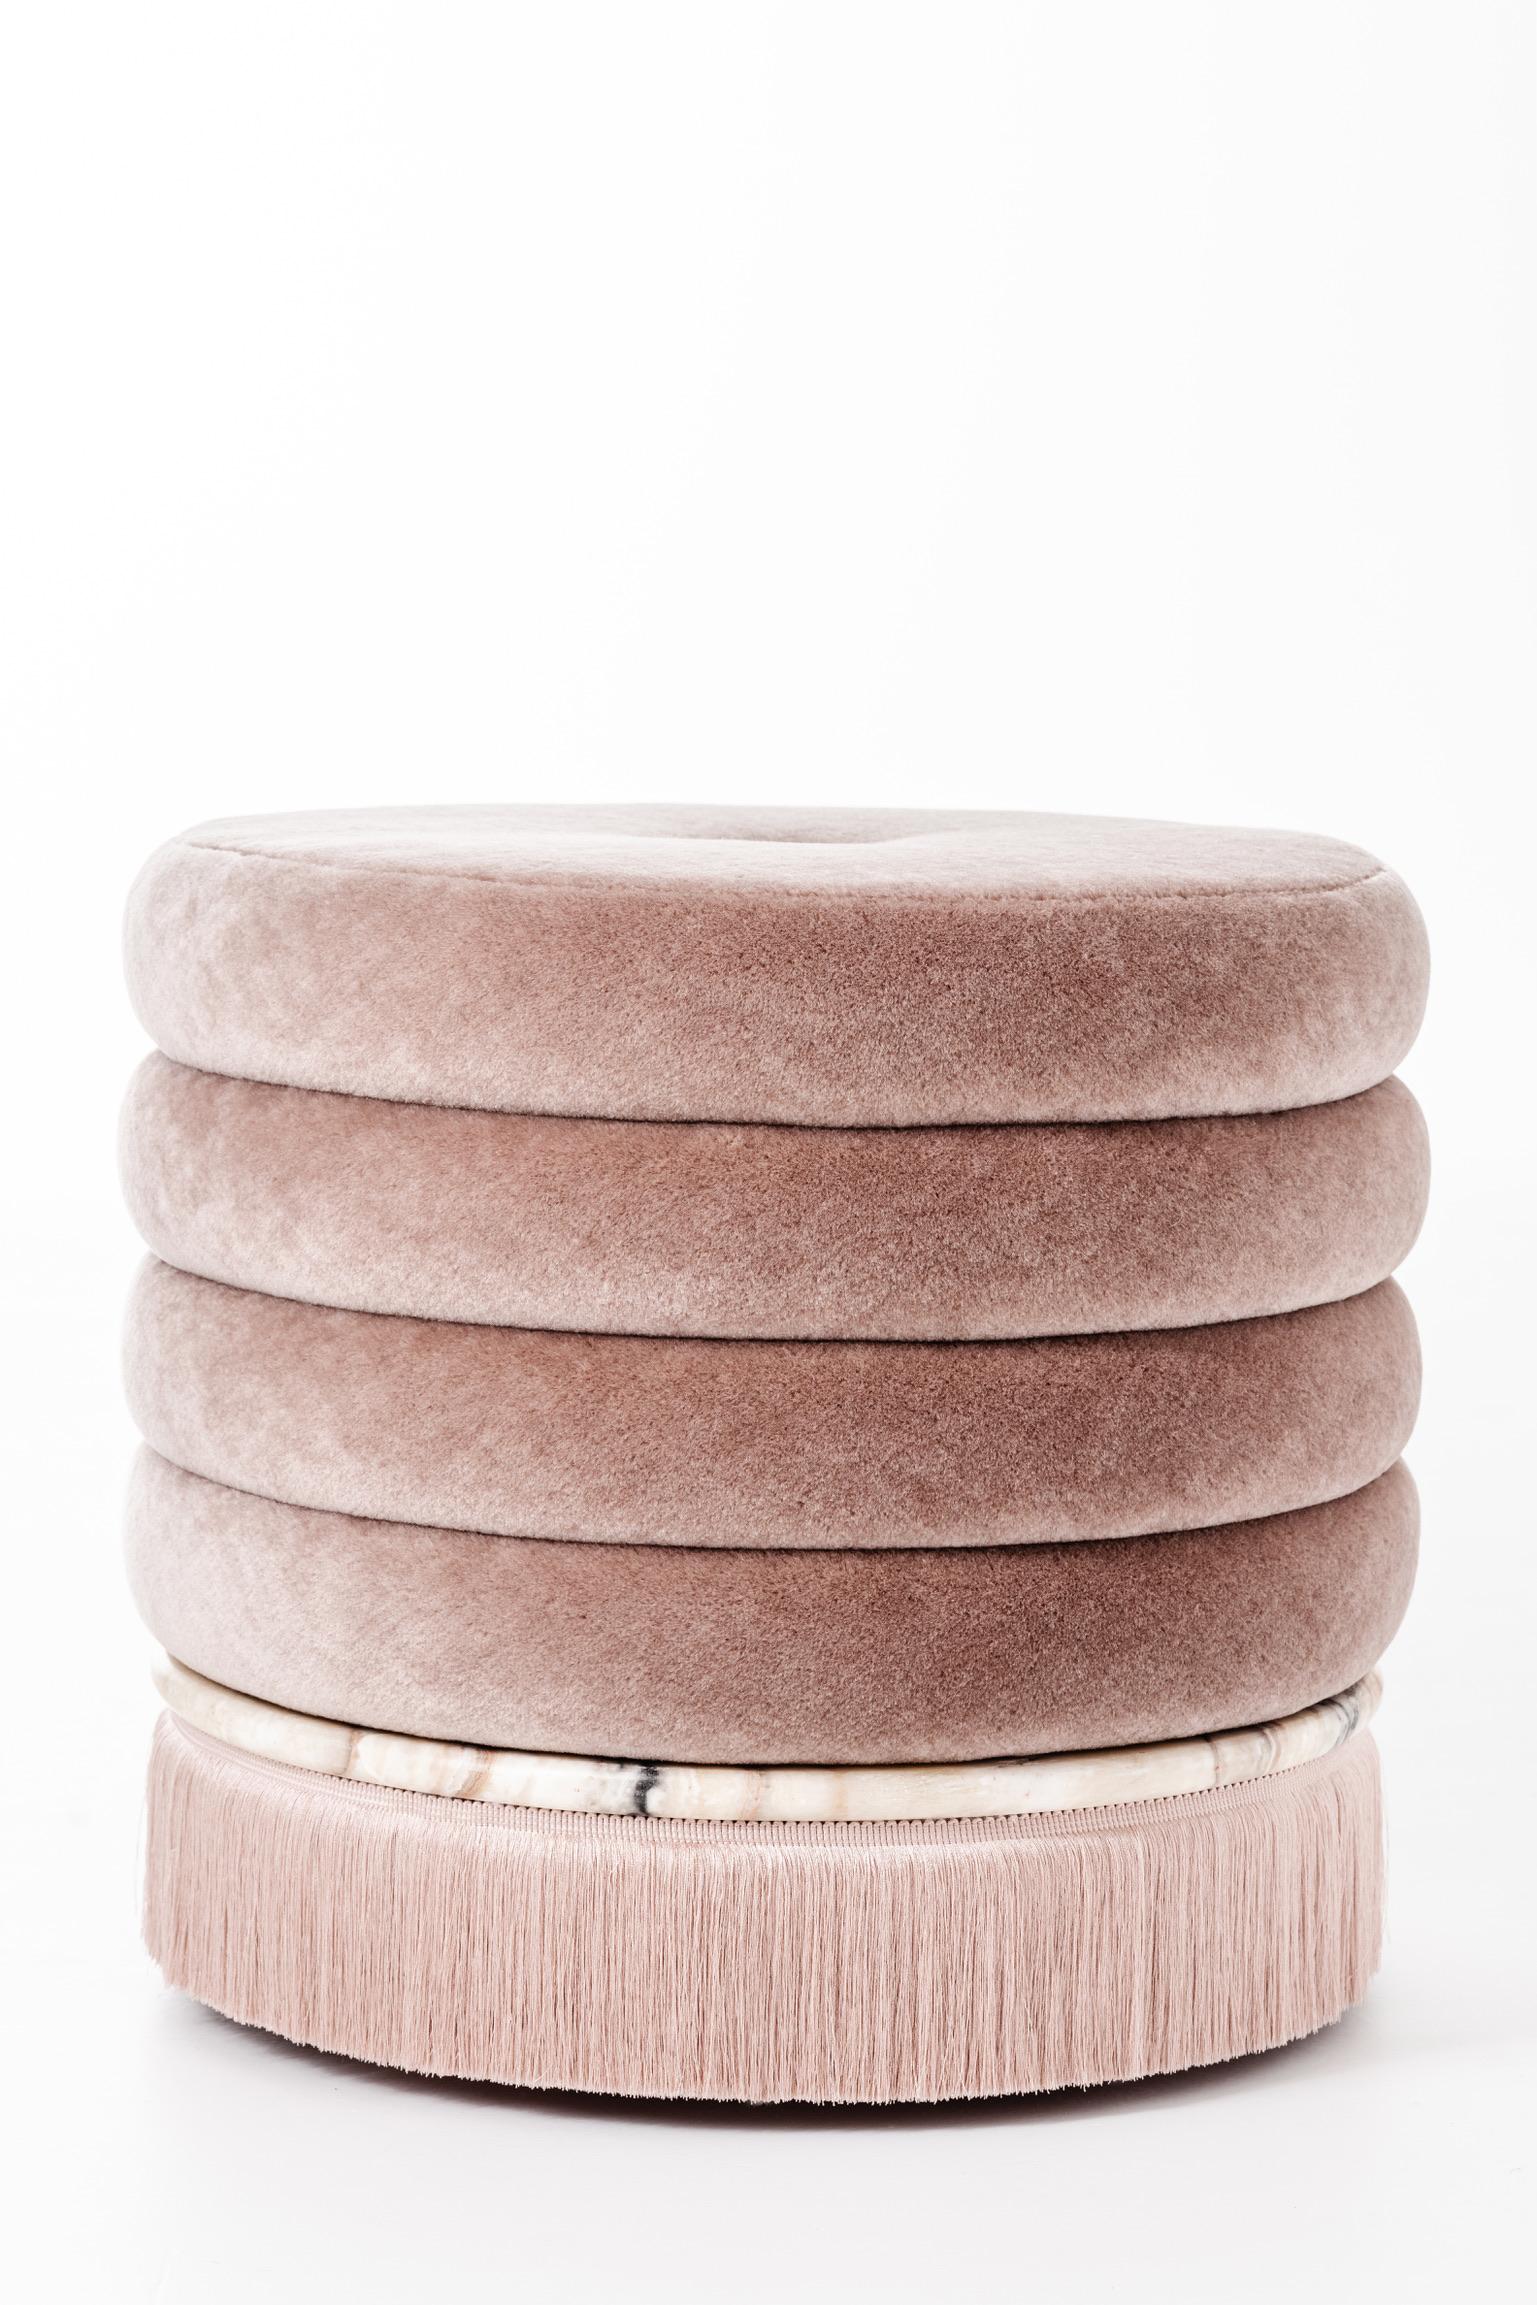 Polished Small Ottoman in Raptor Onyx & Pink Mohair For Sale